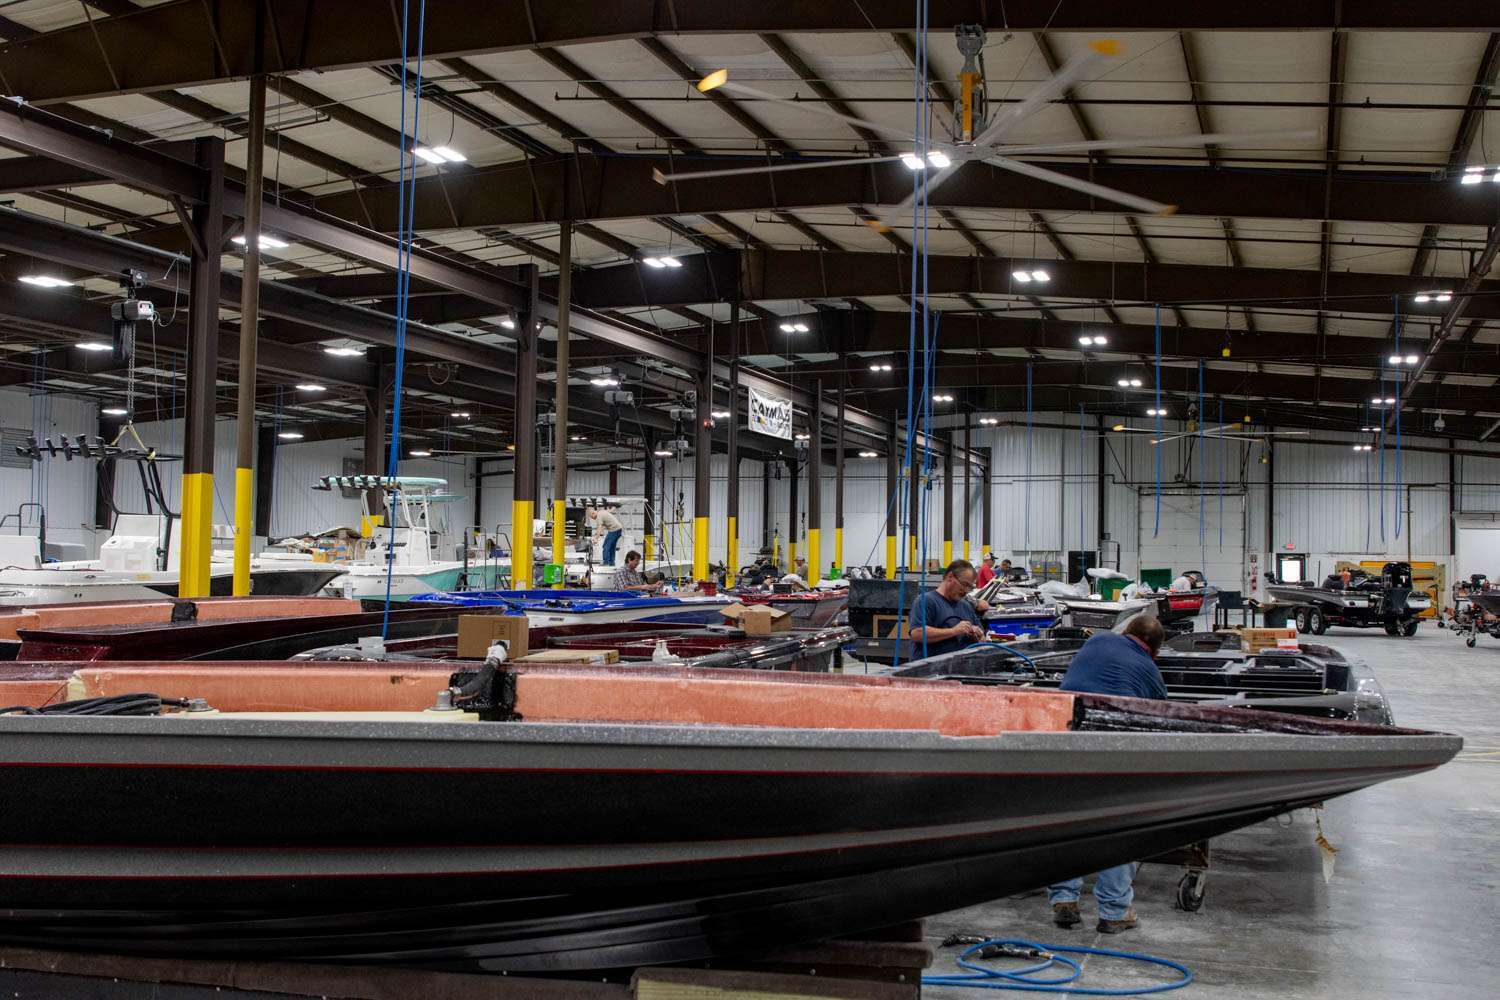 You can see the assembly process for not only the bass boats but for the Caymas saltwater boats, as well.